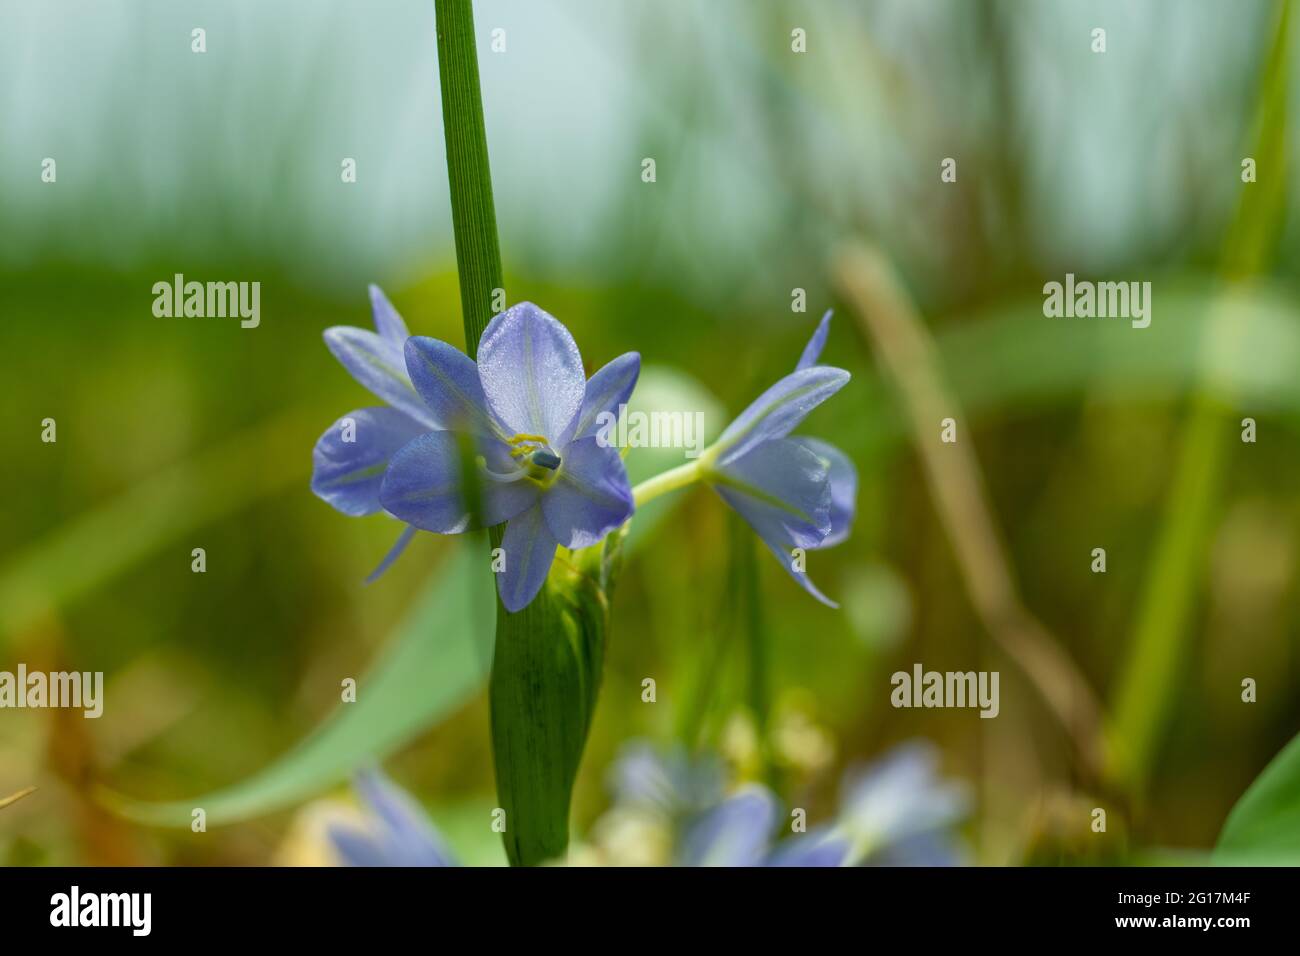 Agapanthus campanulatus or Lily of the Nile is a herbaceous perennial plant leaf and drooping flowers in shades of dark blue colors Stock Photo